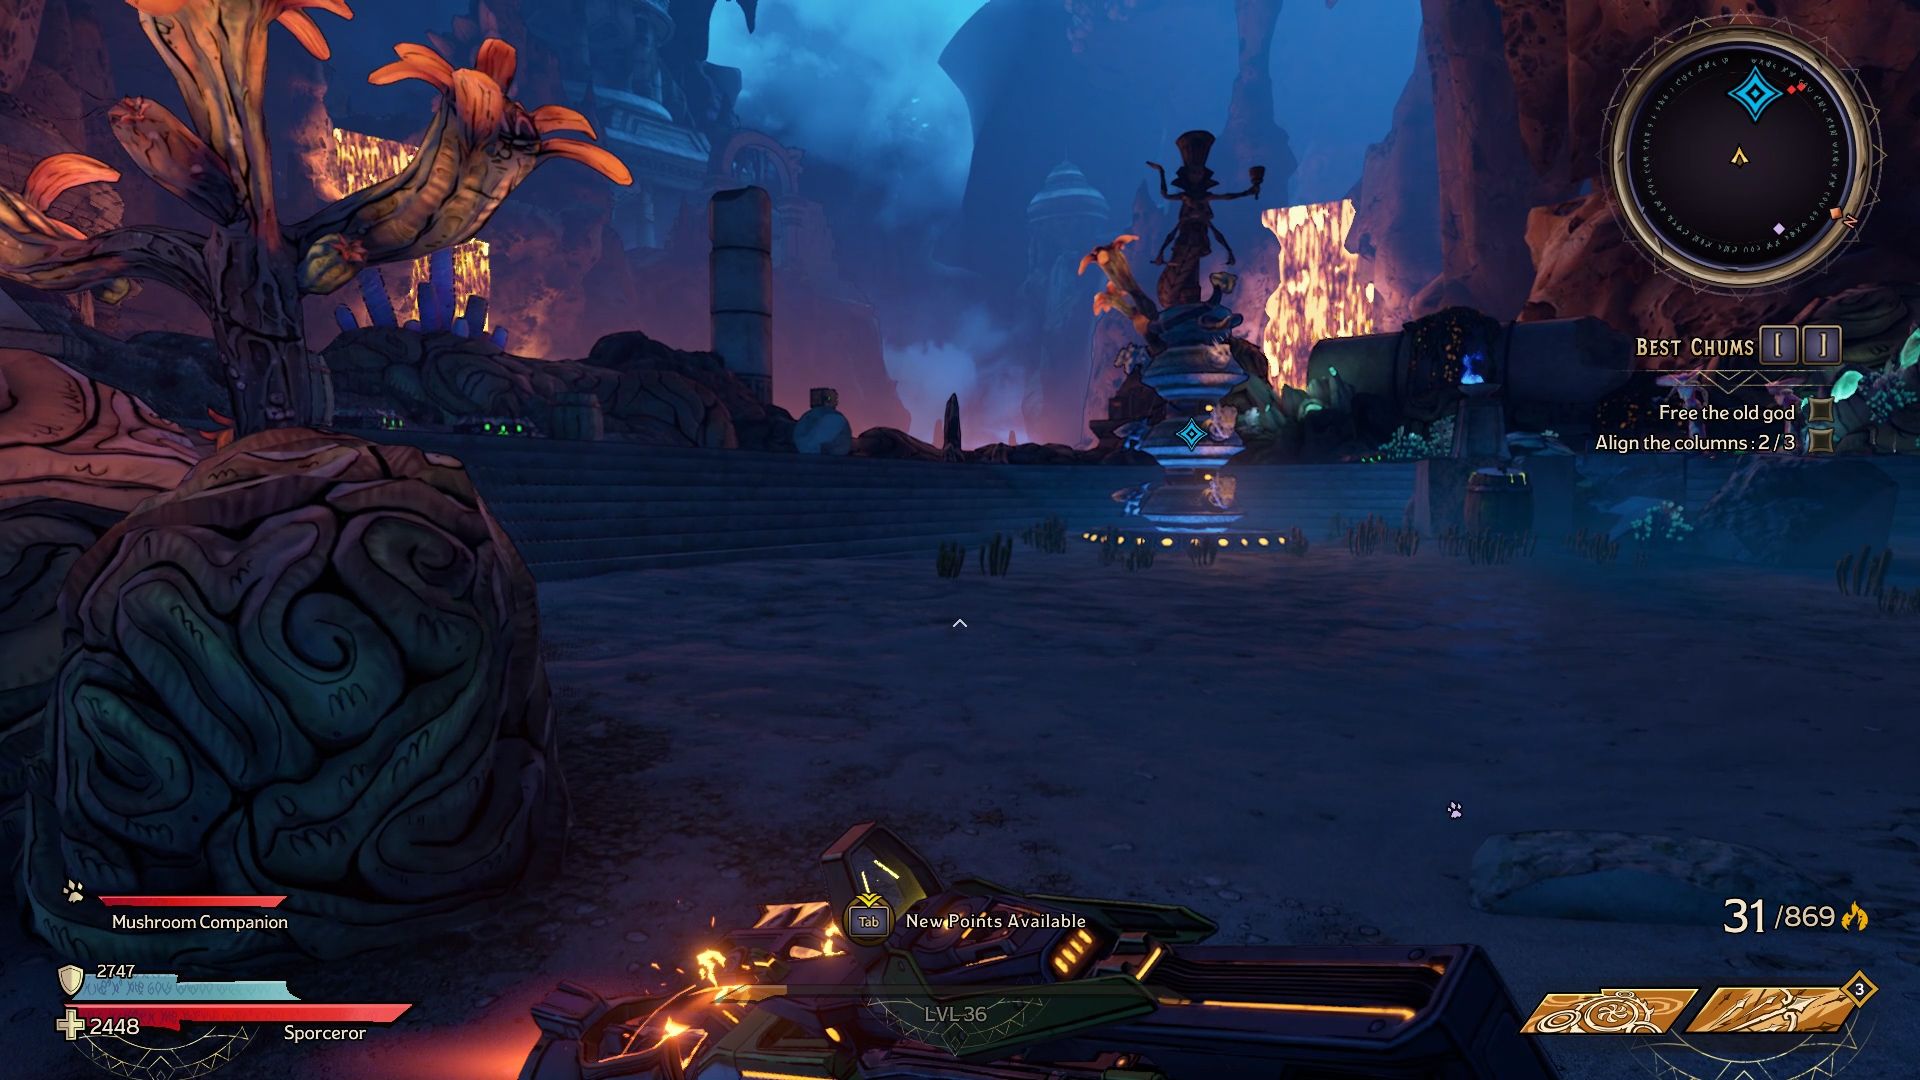 The player looks at a giant puzzle column in an open courtyard area overgrown with coral and waterfalls and lava in the background